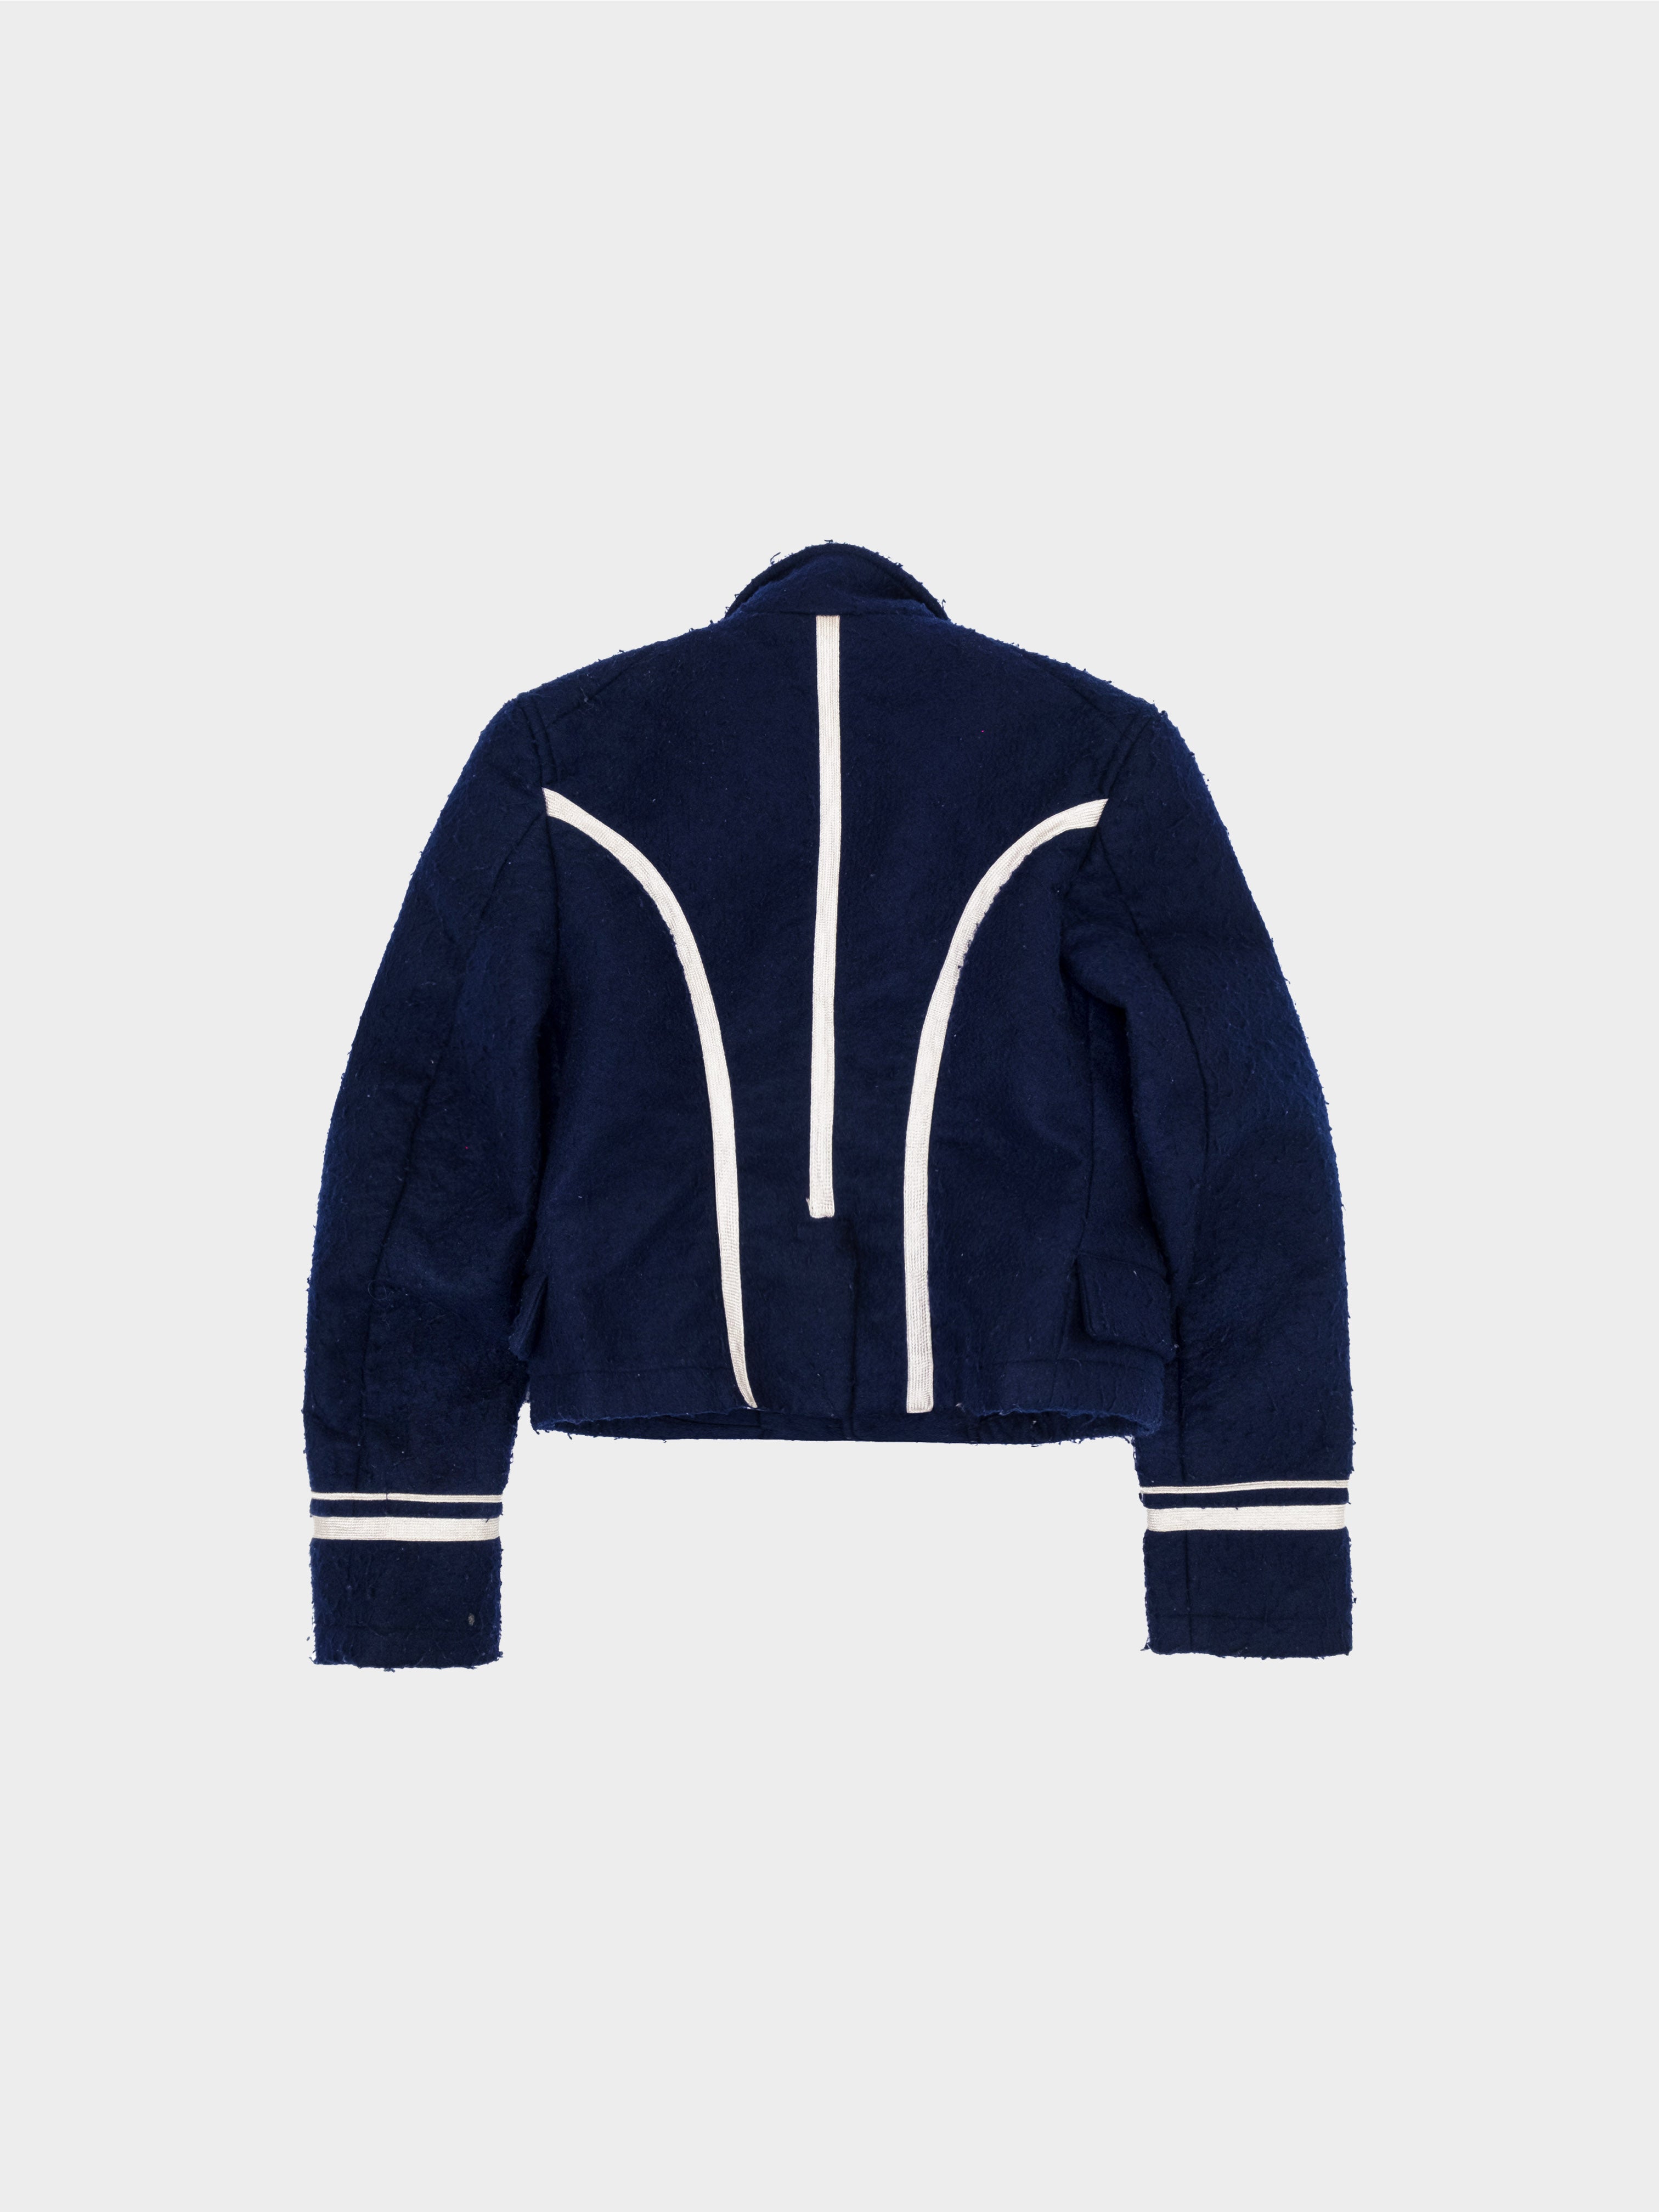 Comme des Garçons 2007 Navy Wool Blazer with Piping